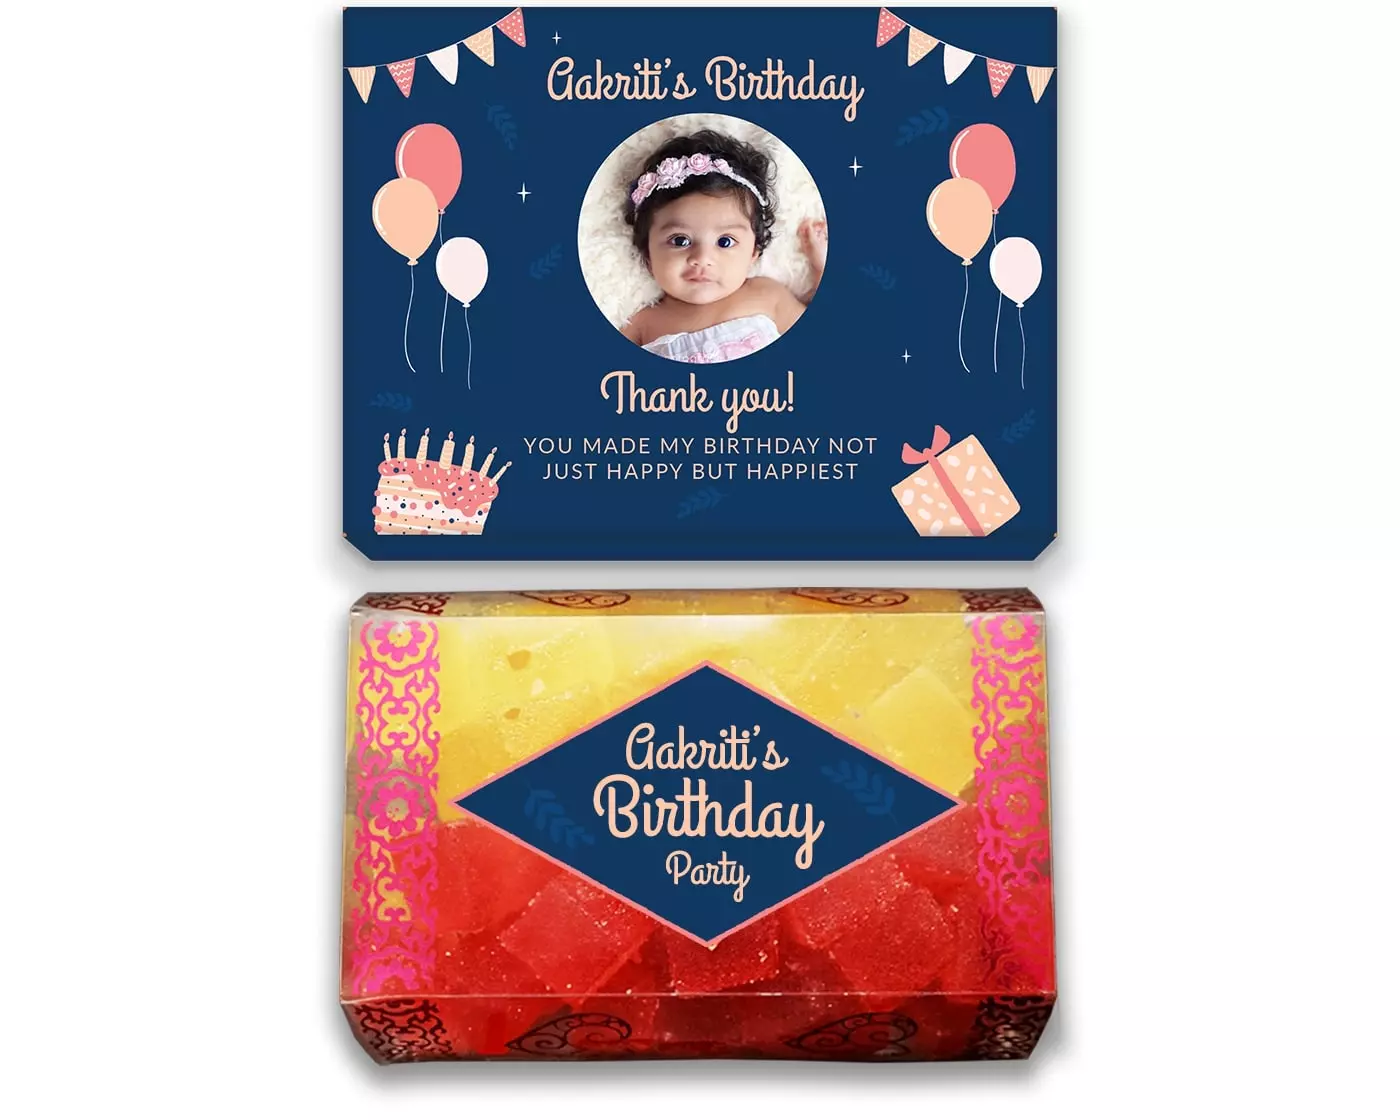 Design Number 9 of Jelly Sweets in Customized Boxes for Birthday Return Gifts